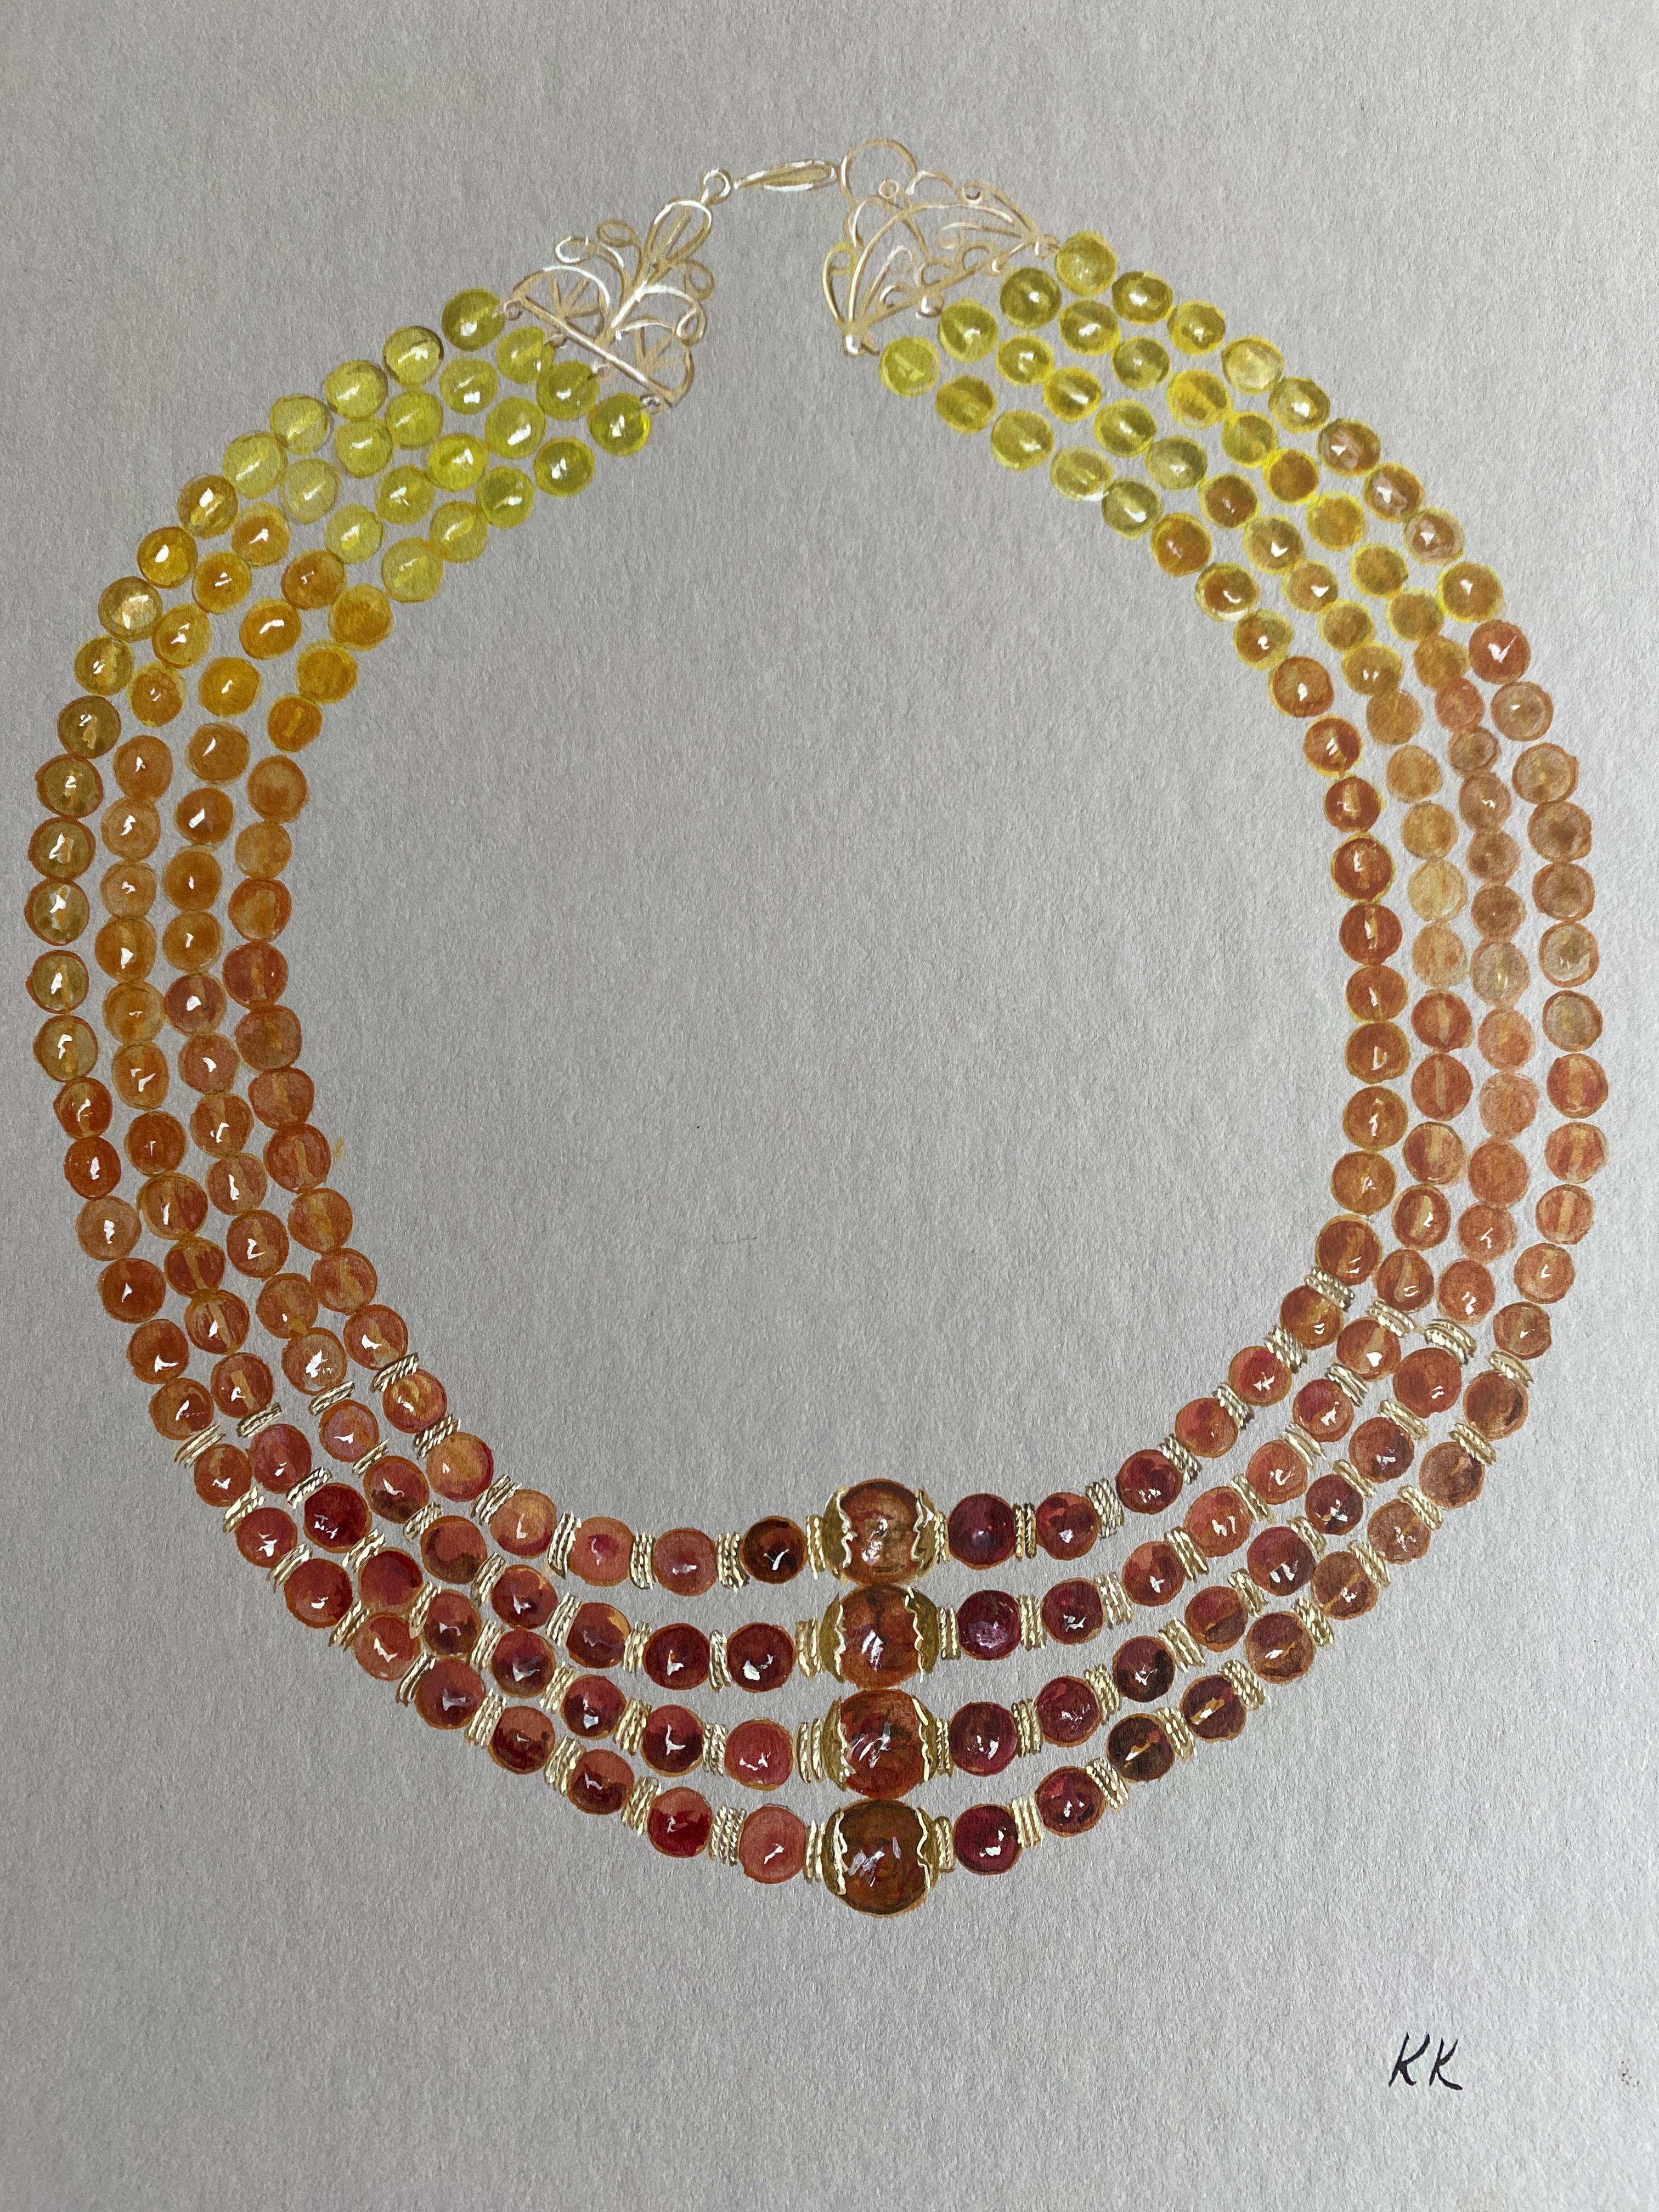 Watercolor on board, each rendered in vibrant color and detail. Each necklace formed part of the Aristocratic Collection sold here in 2007. Actual necklaces are sold. We're featuring the designs only: 

Clockwise: Ekaterina: depicting Russian amber